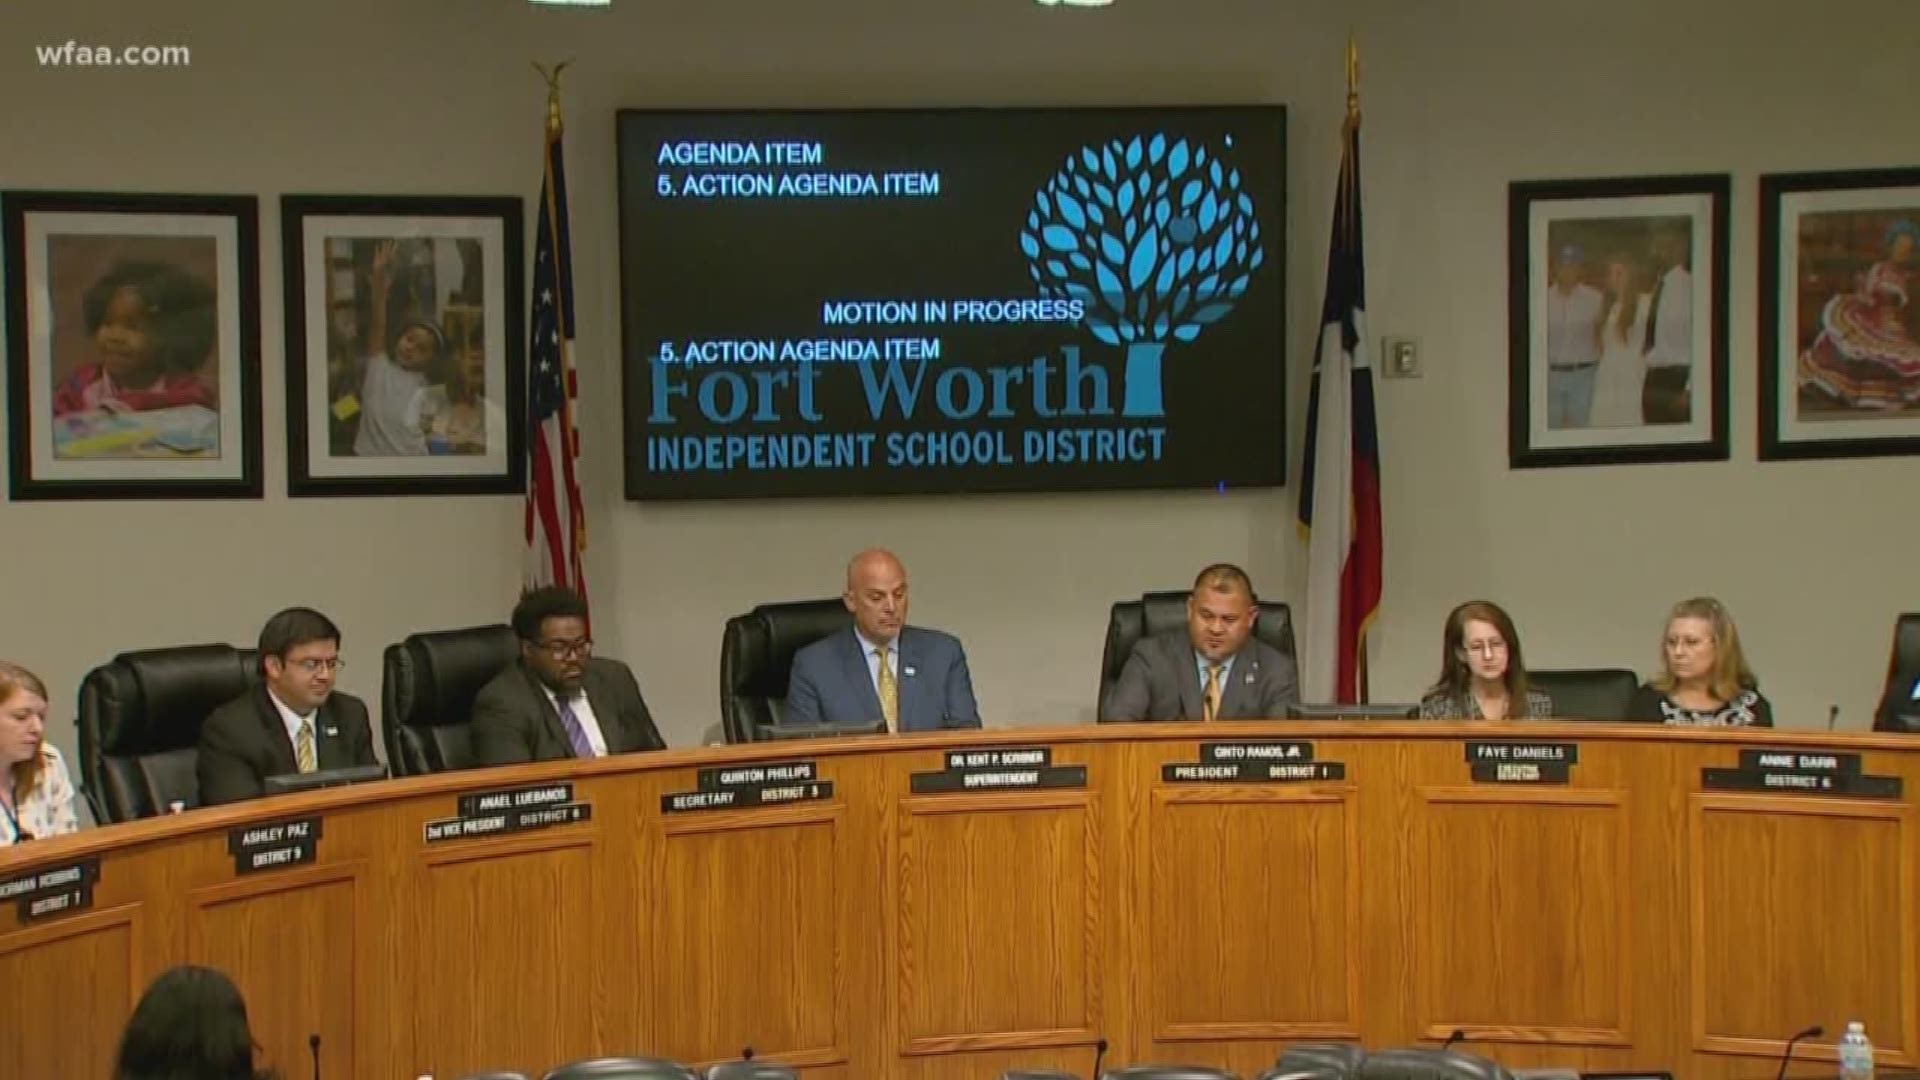 Fort Worth ISD unanimously voted Tuesday to uphold the June 2019 firing of one of its teachers after she made anti-immigrant comments on social media.

In early June, Fort Worth ISD board members voted to terminate Georgia Clark, a Carter Riverside High School English teacher, for making those comments.